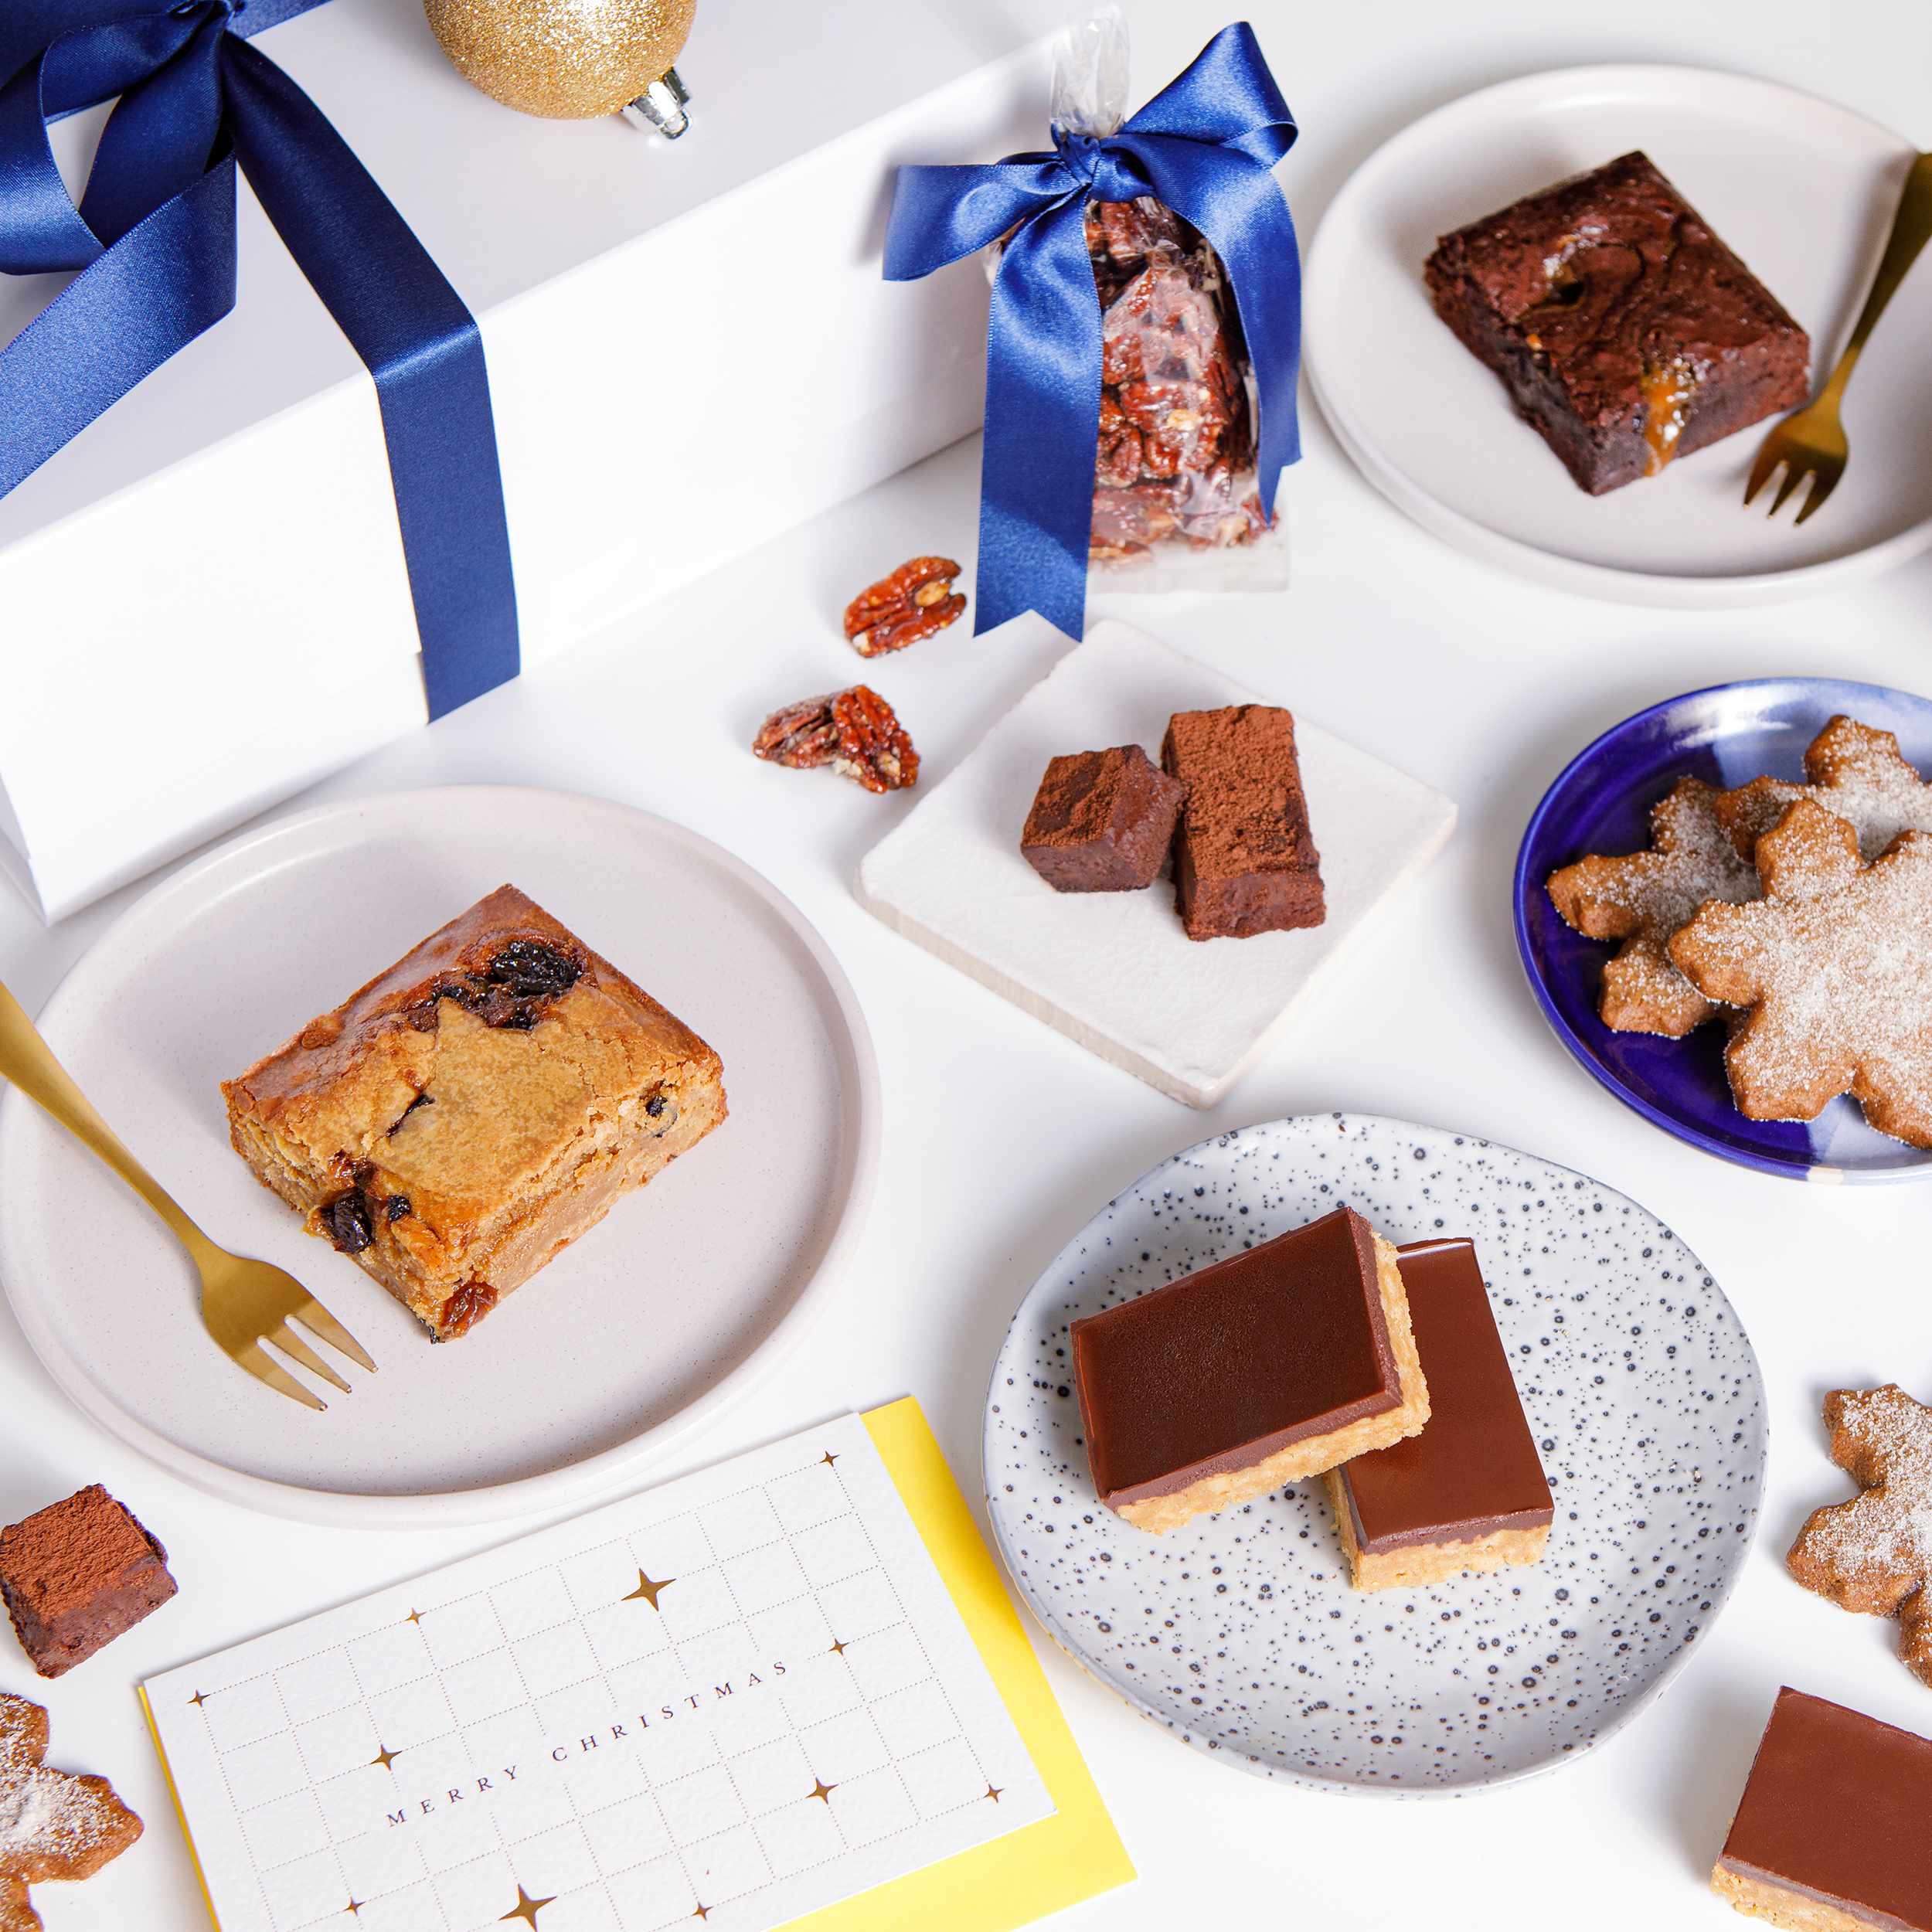 Crafted Sweetness: Bespoke Sweet Treat Hampers for the Holidays